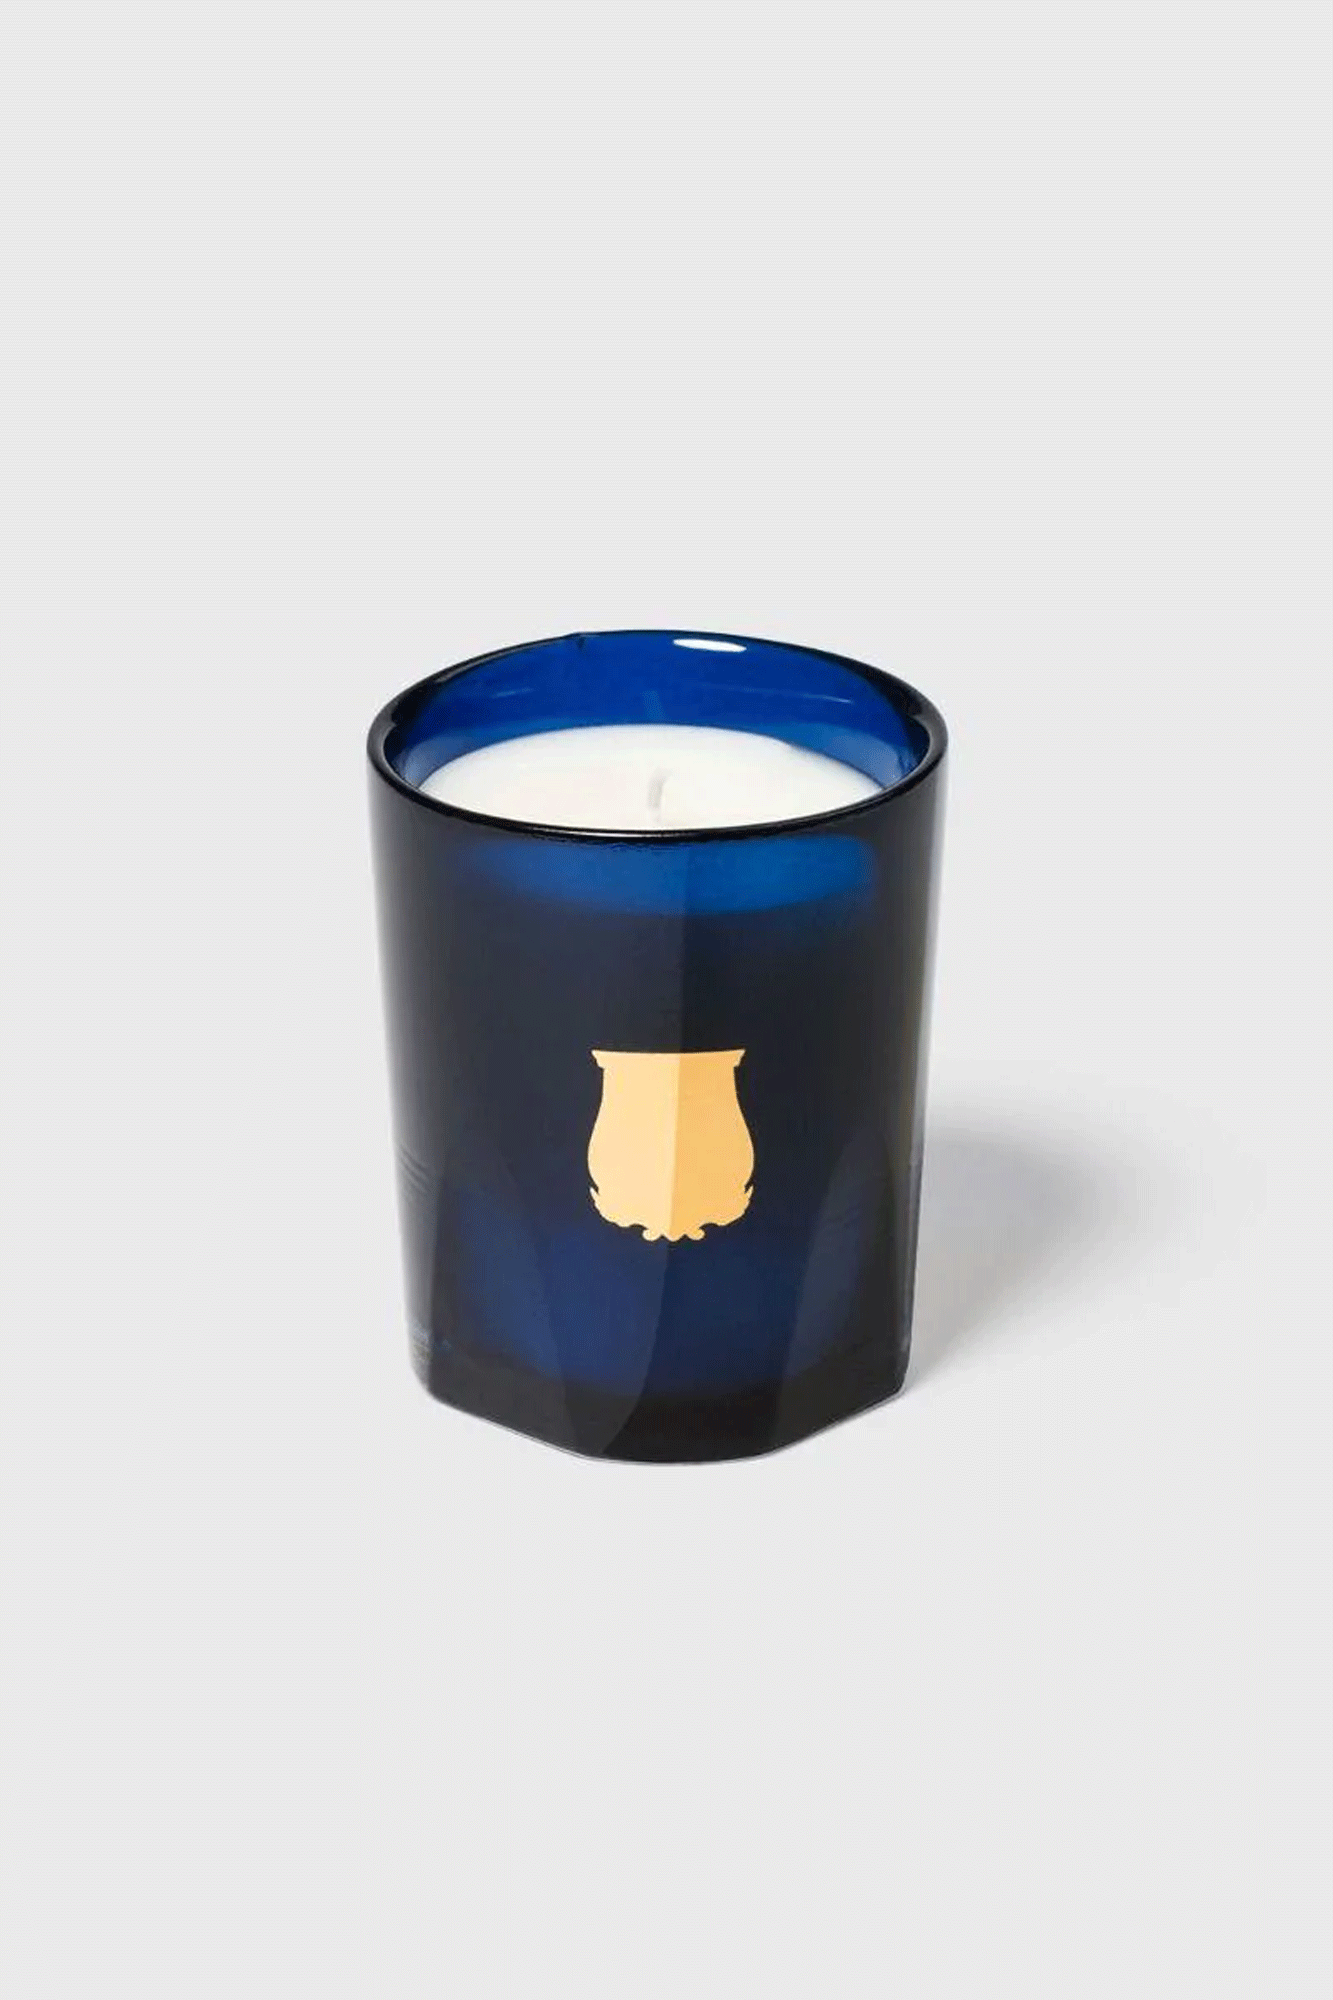 Quite the ideal companion. An easy size to travel with, La Petite Bougie blends in wherever it goes and can easily turn into the perfect gift. They are manufactured at the Trudon workshop in Normandy, France, using unrivaled know-how inherited from master candle makers.